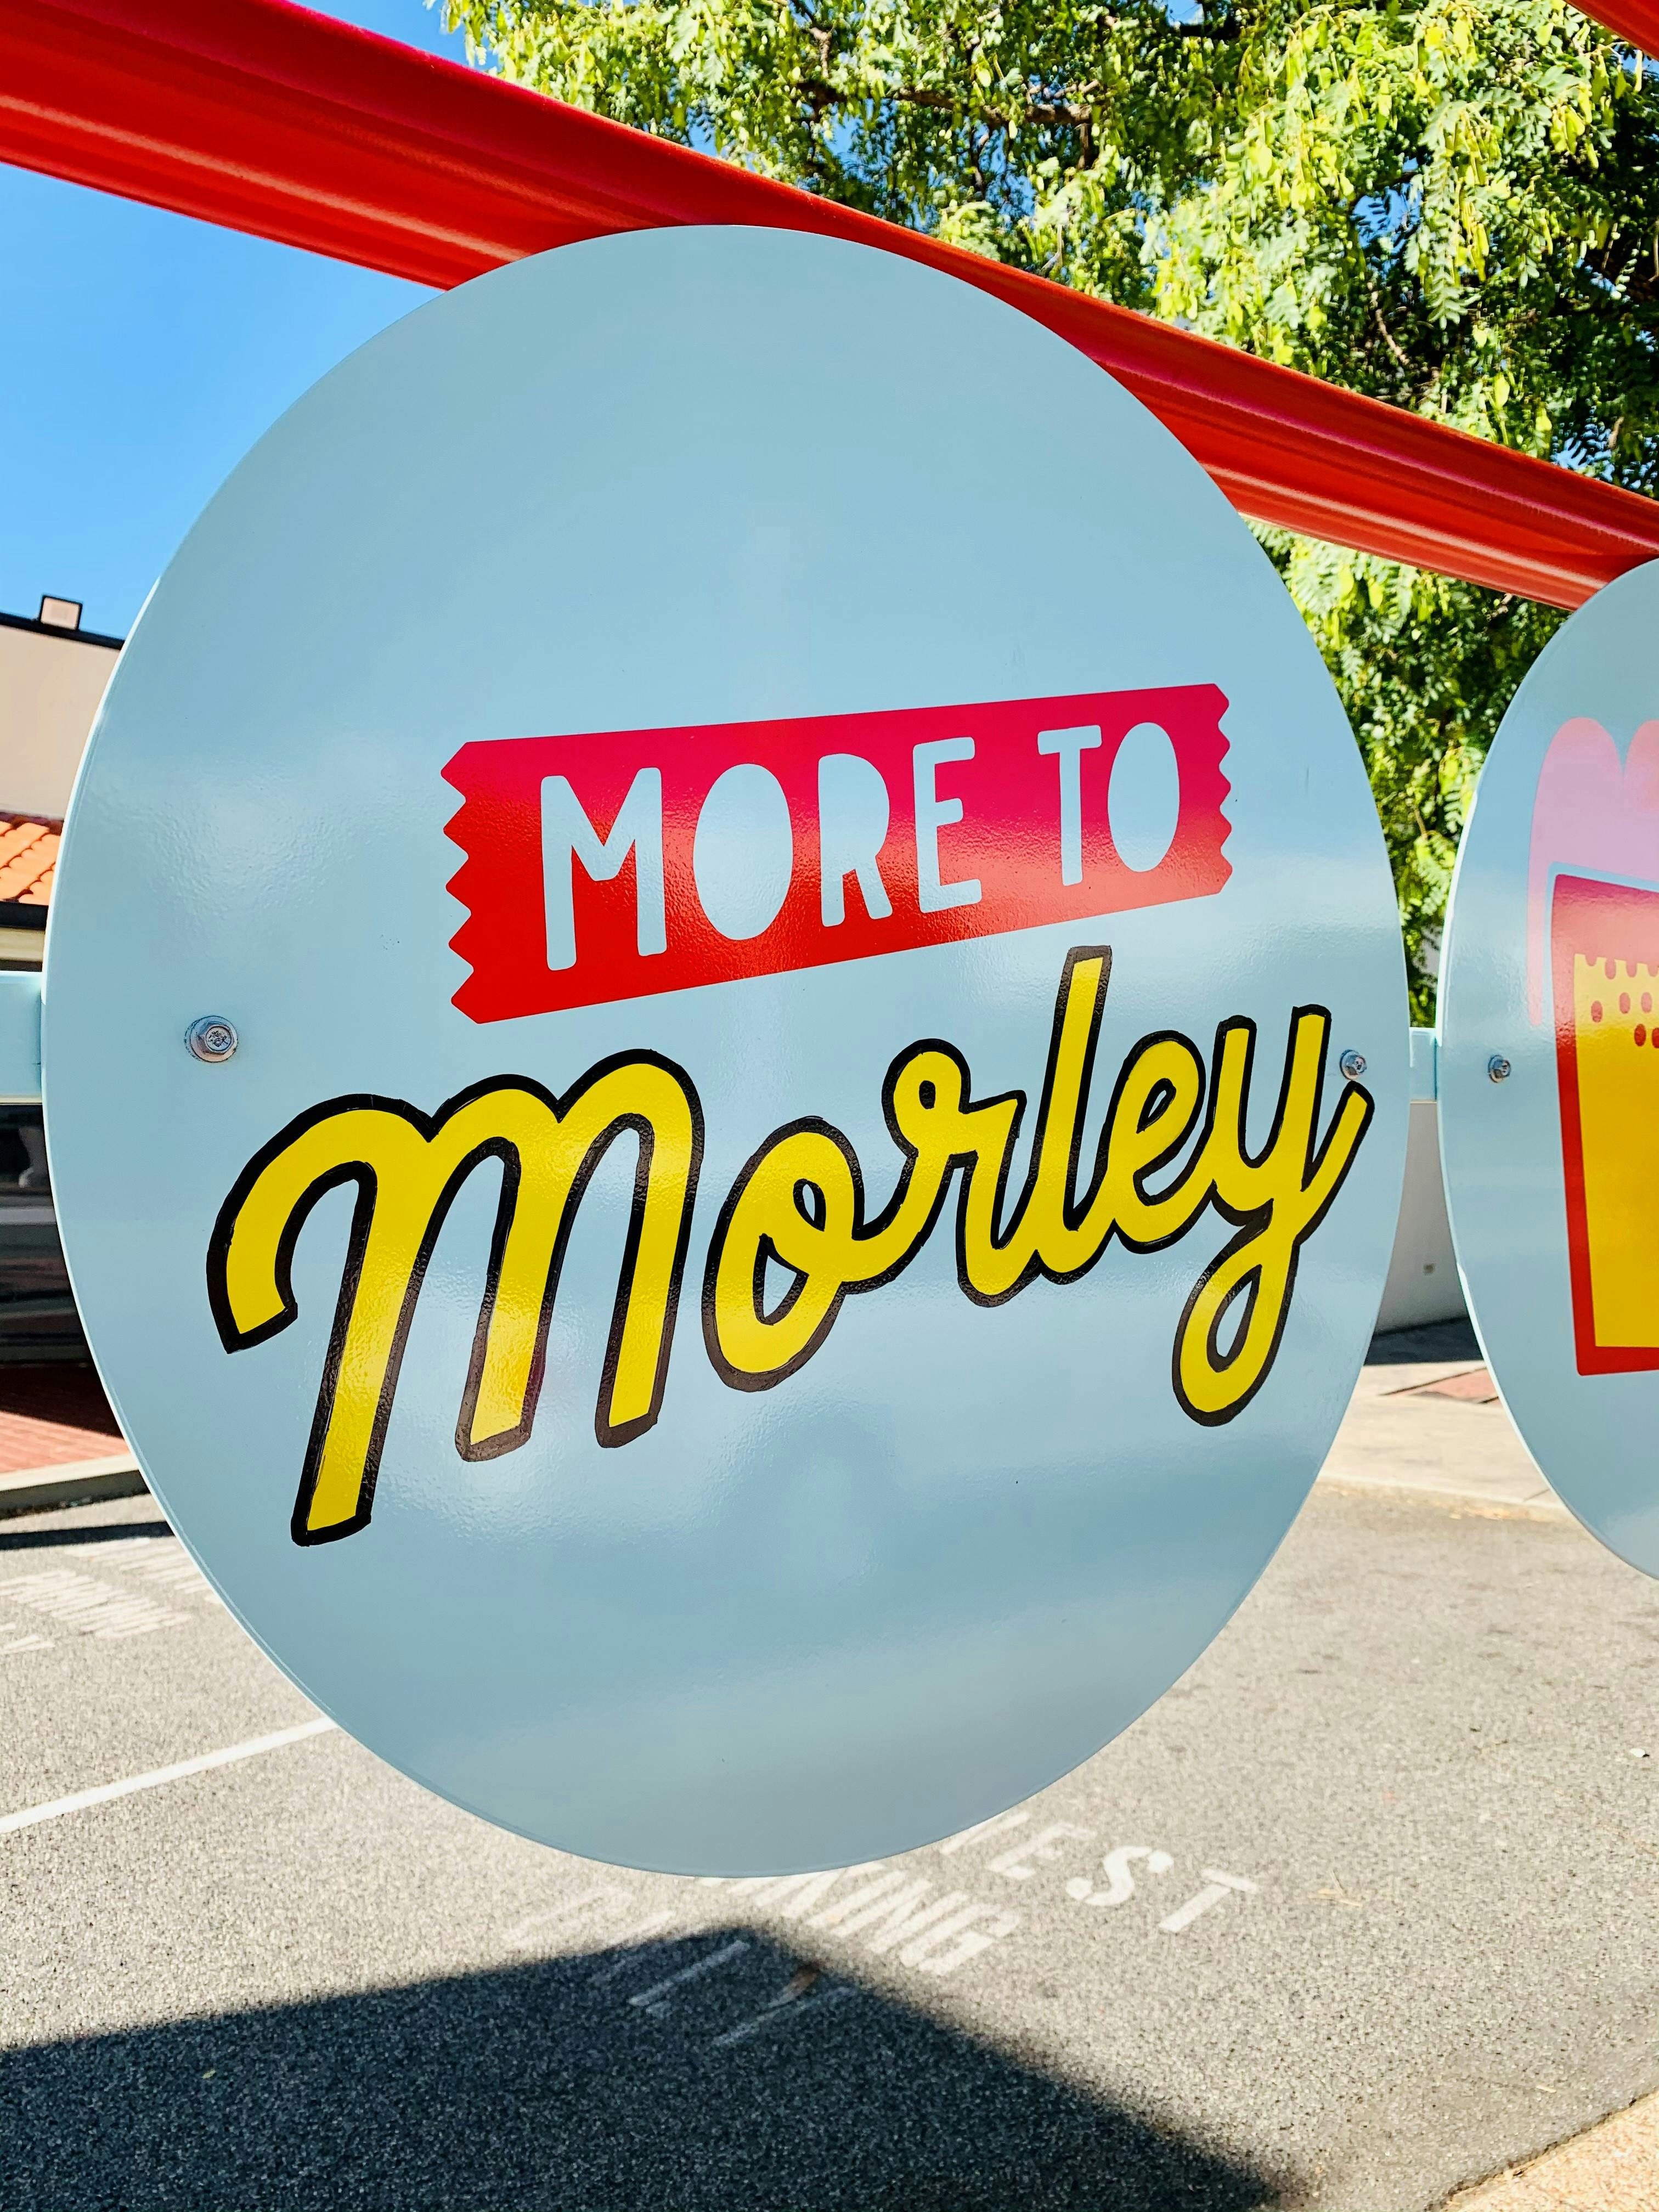 More to Morley Sign.jpg